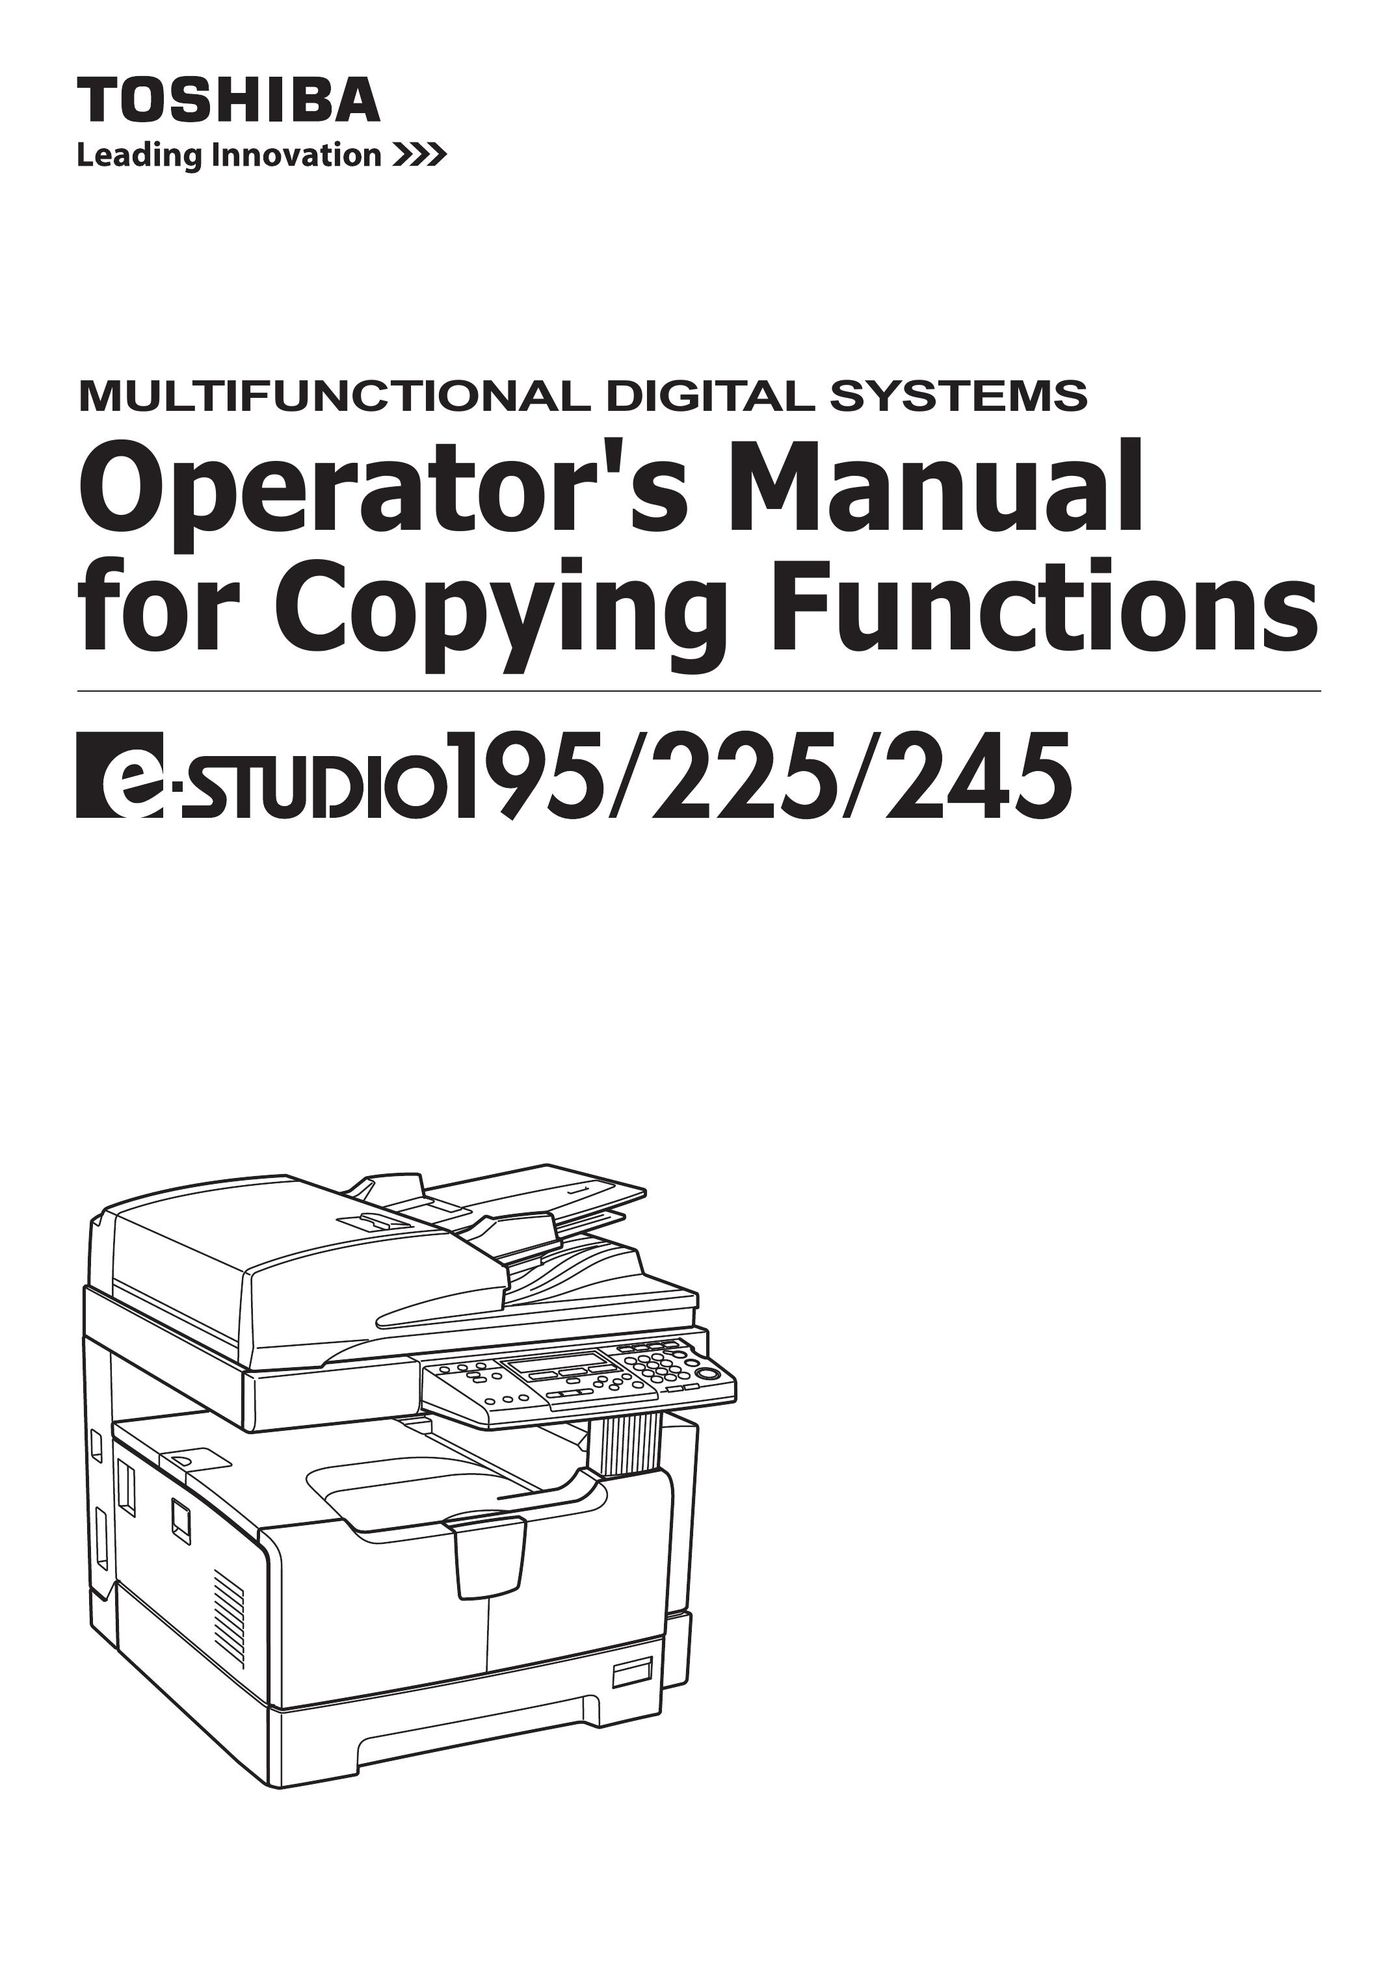 Toshiba 245 All in One Printer User Manual